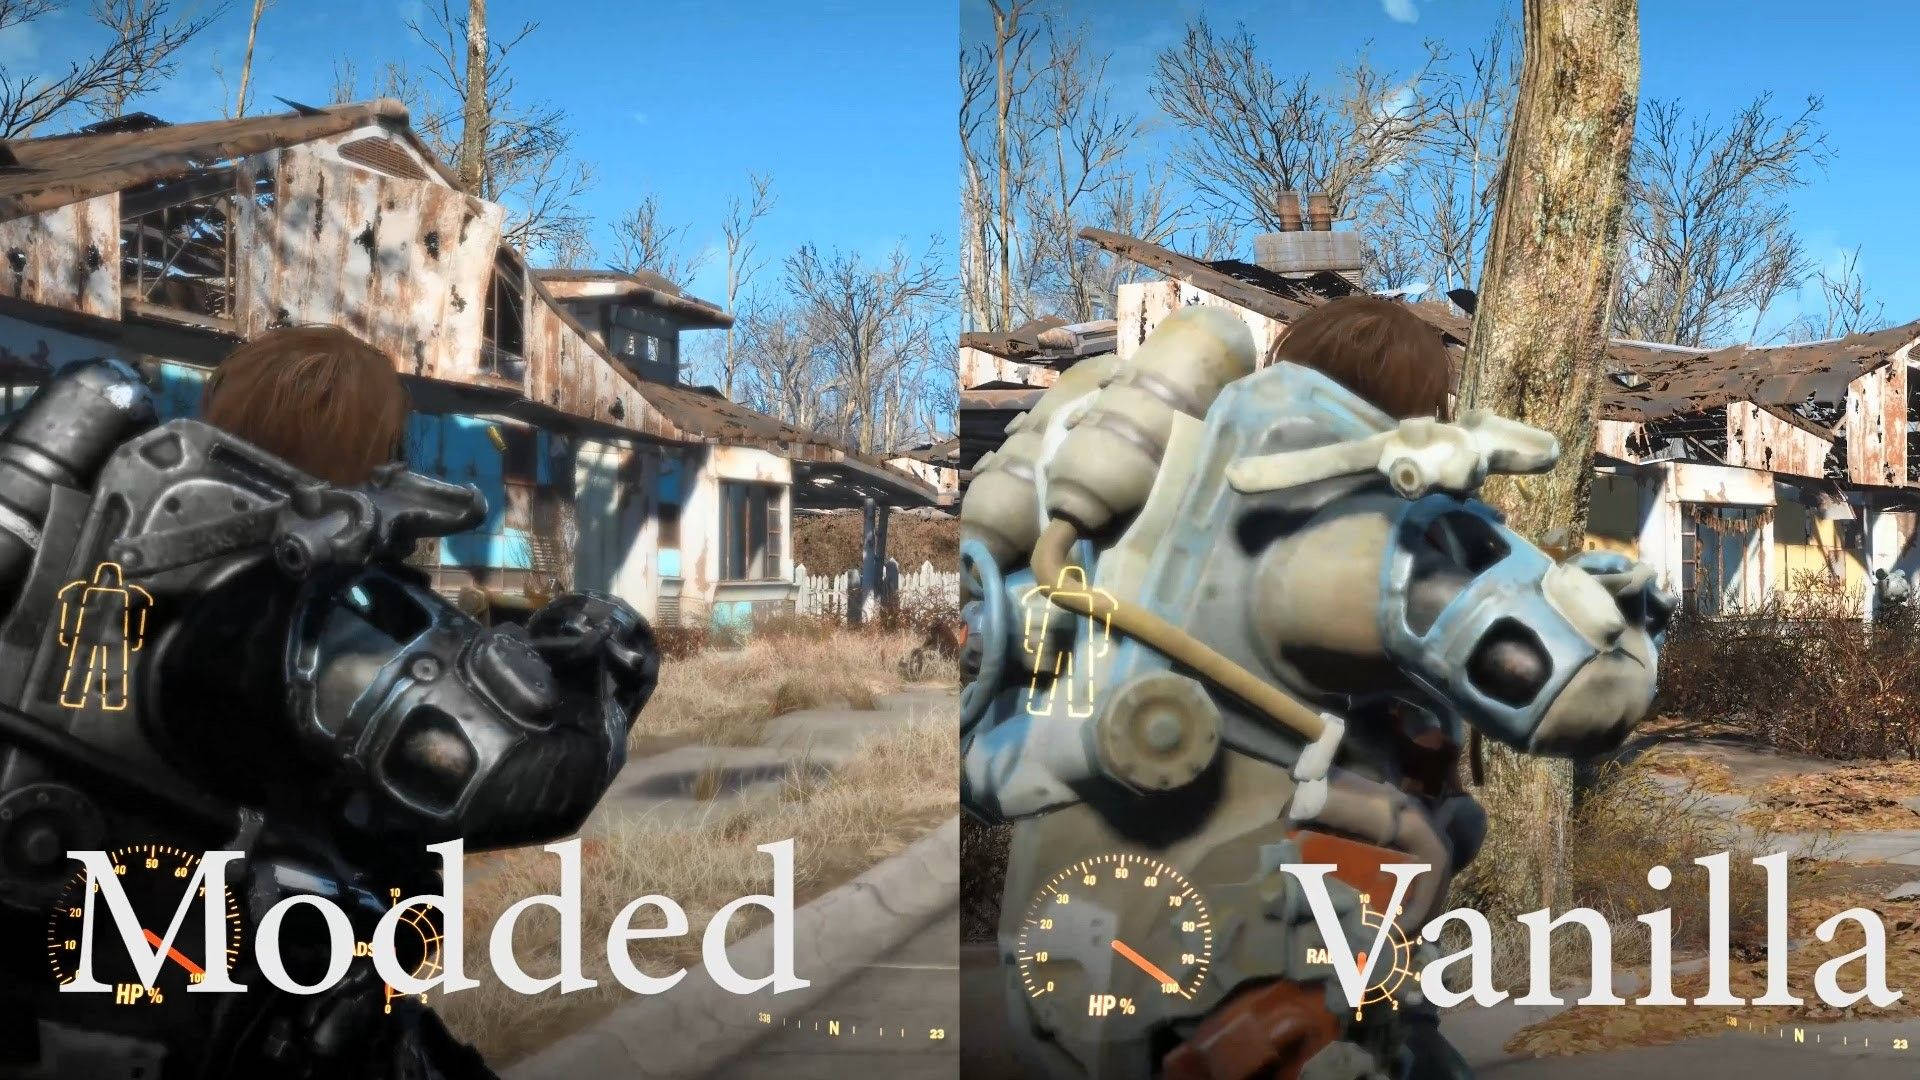 Take the challenge and choose between Modded or Vanilla Power Armor in Fallout 4. Wallpaper